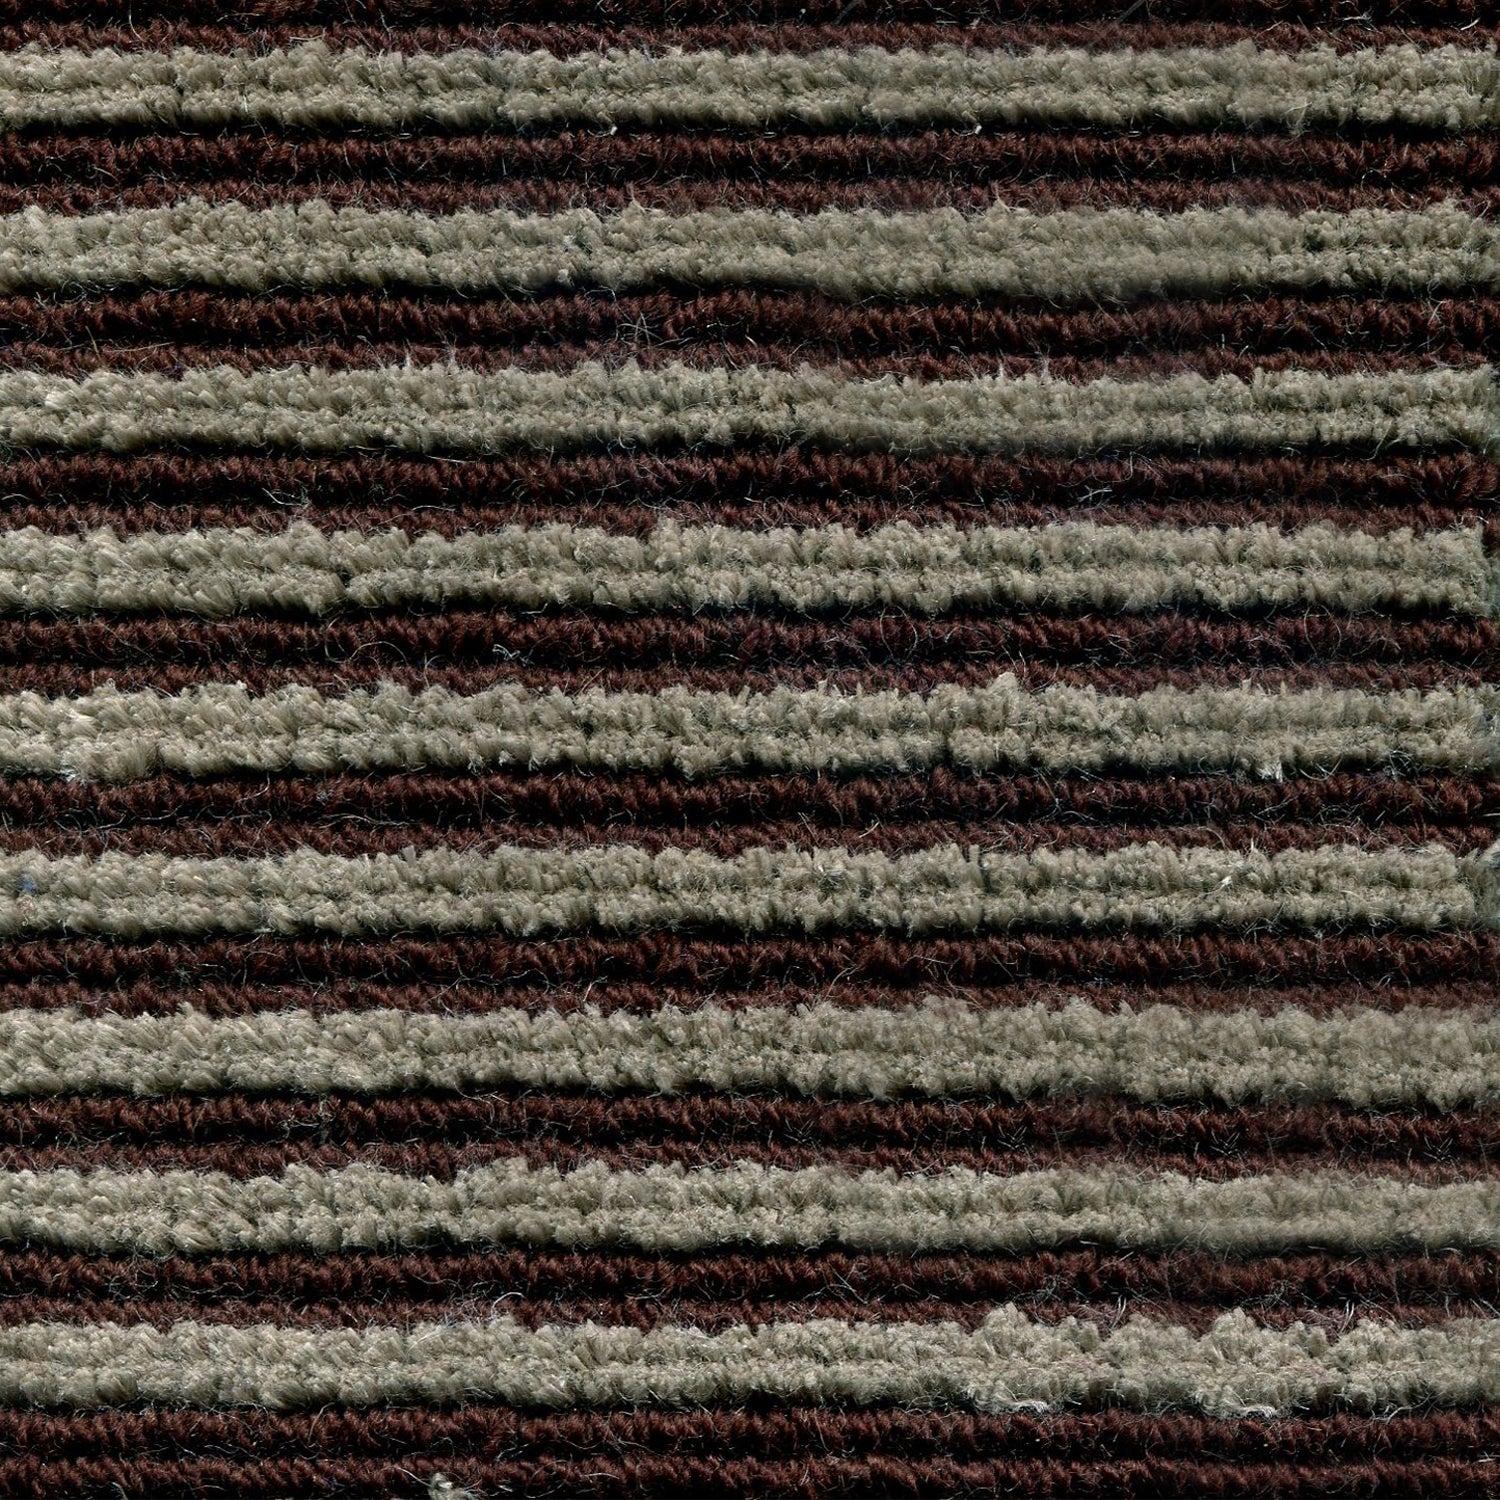 Wool-linen broadloom carpet swatch in a chunky striped weave in shades of gray and dark brown.